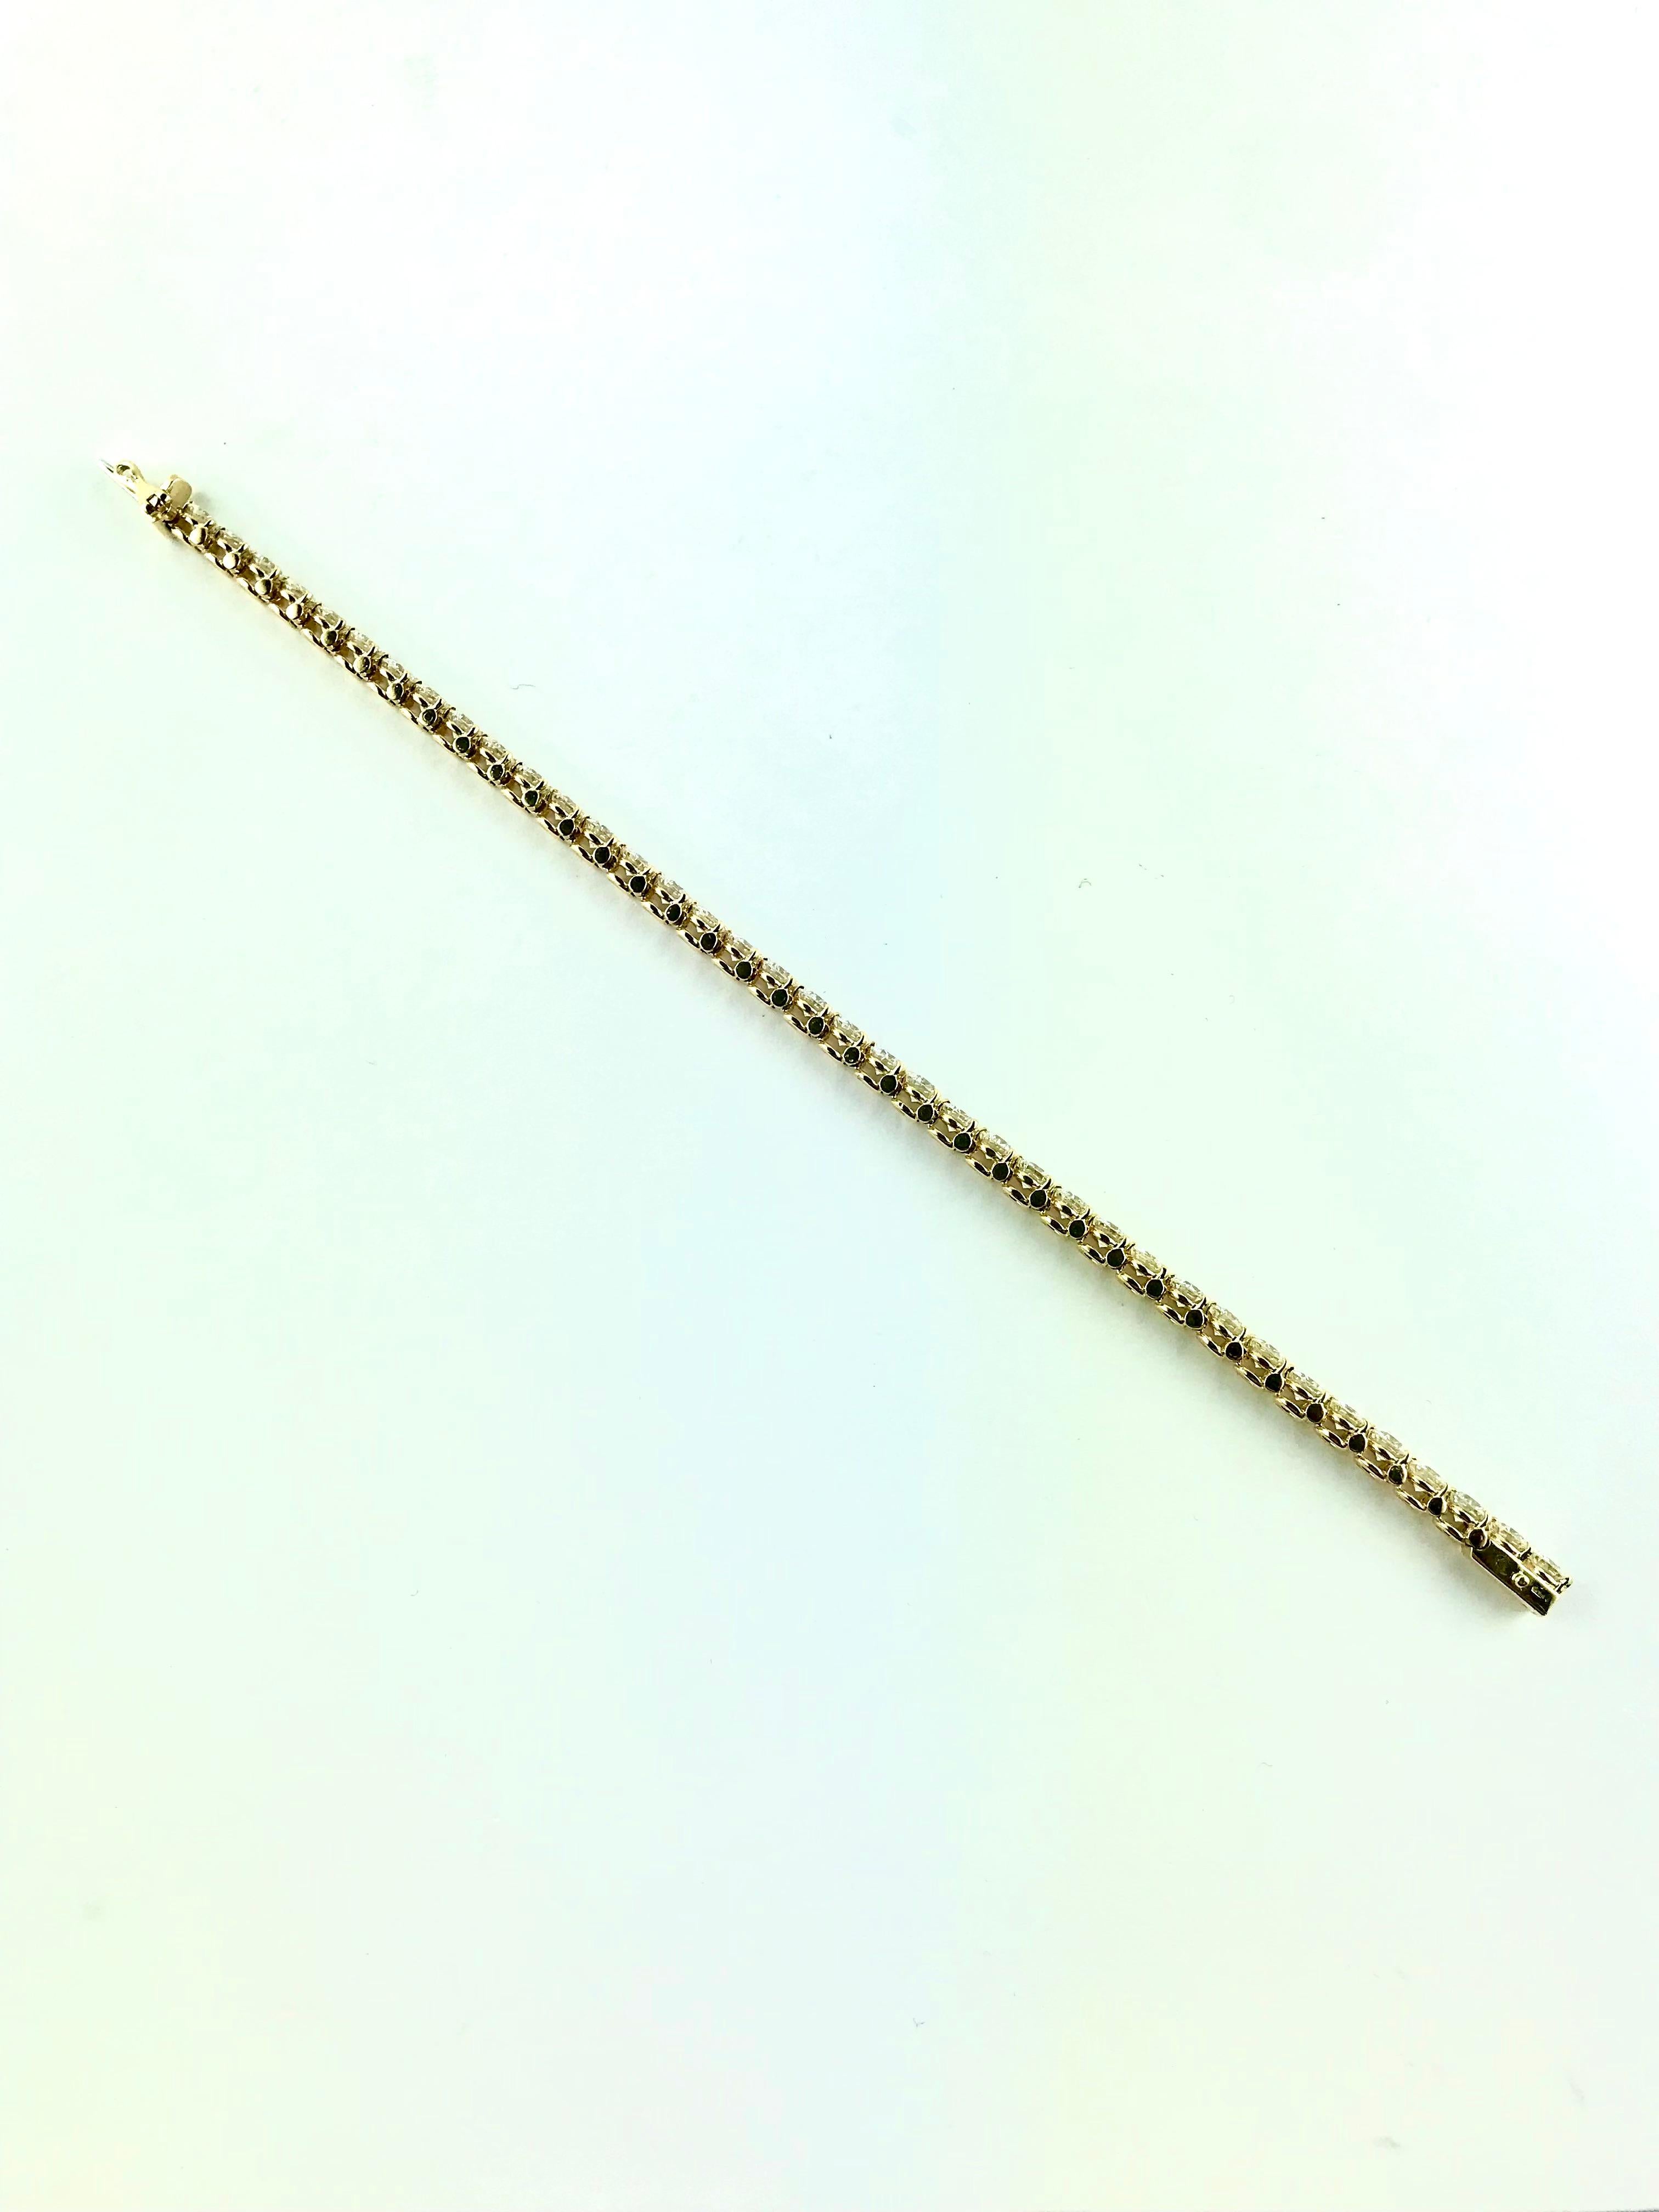 Round Cut 1993 Cartier Yellow Gold and Diamond Tennis Bracelet For Sale